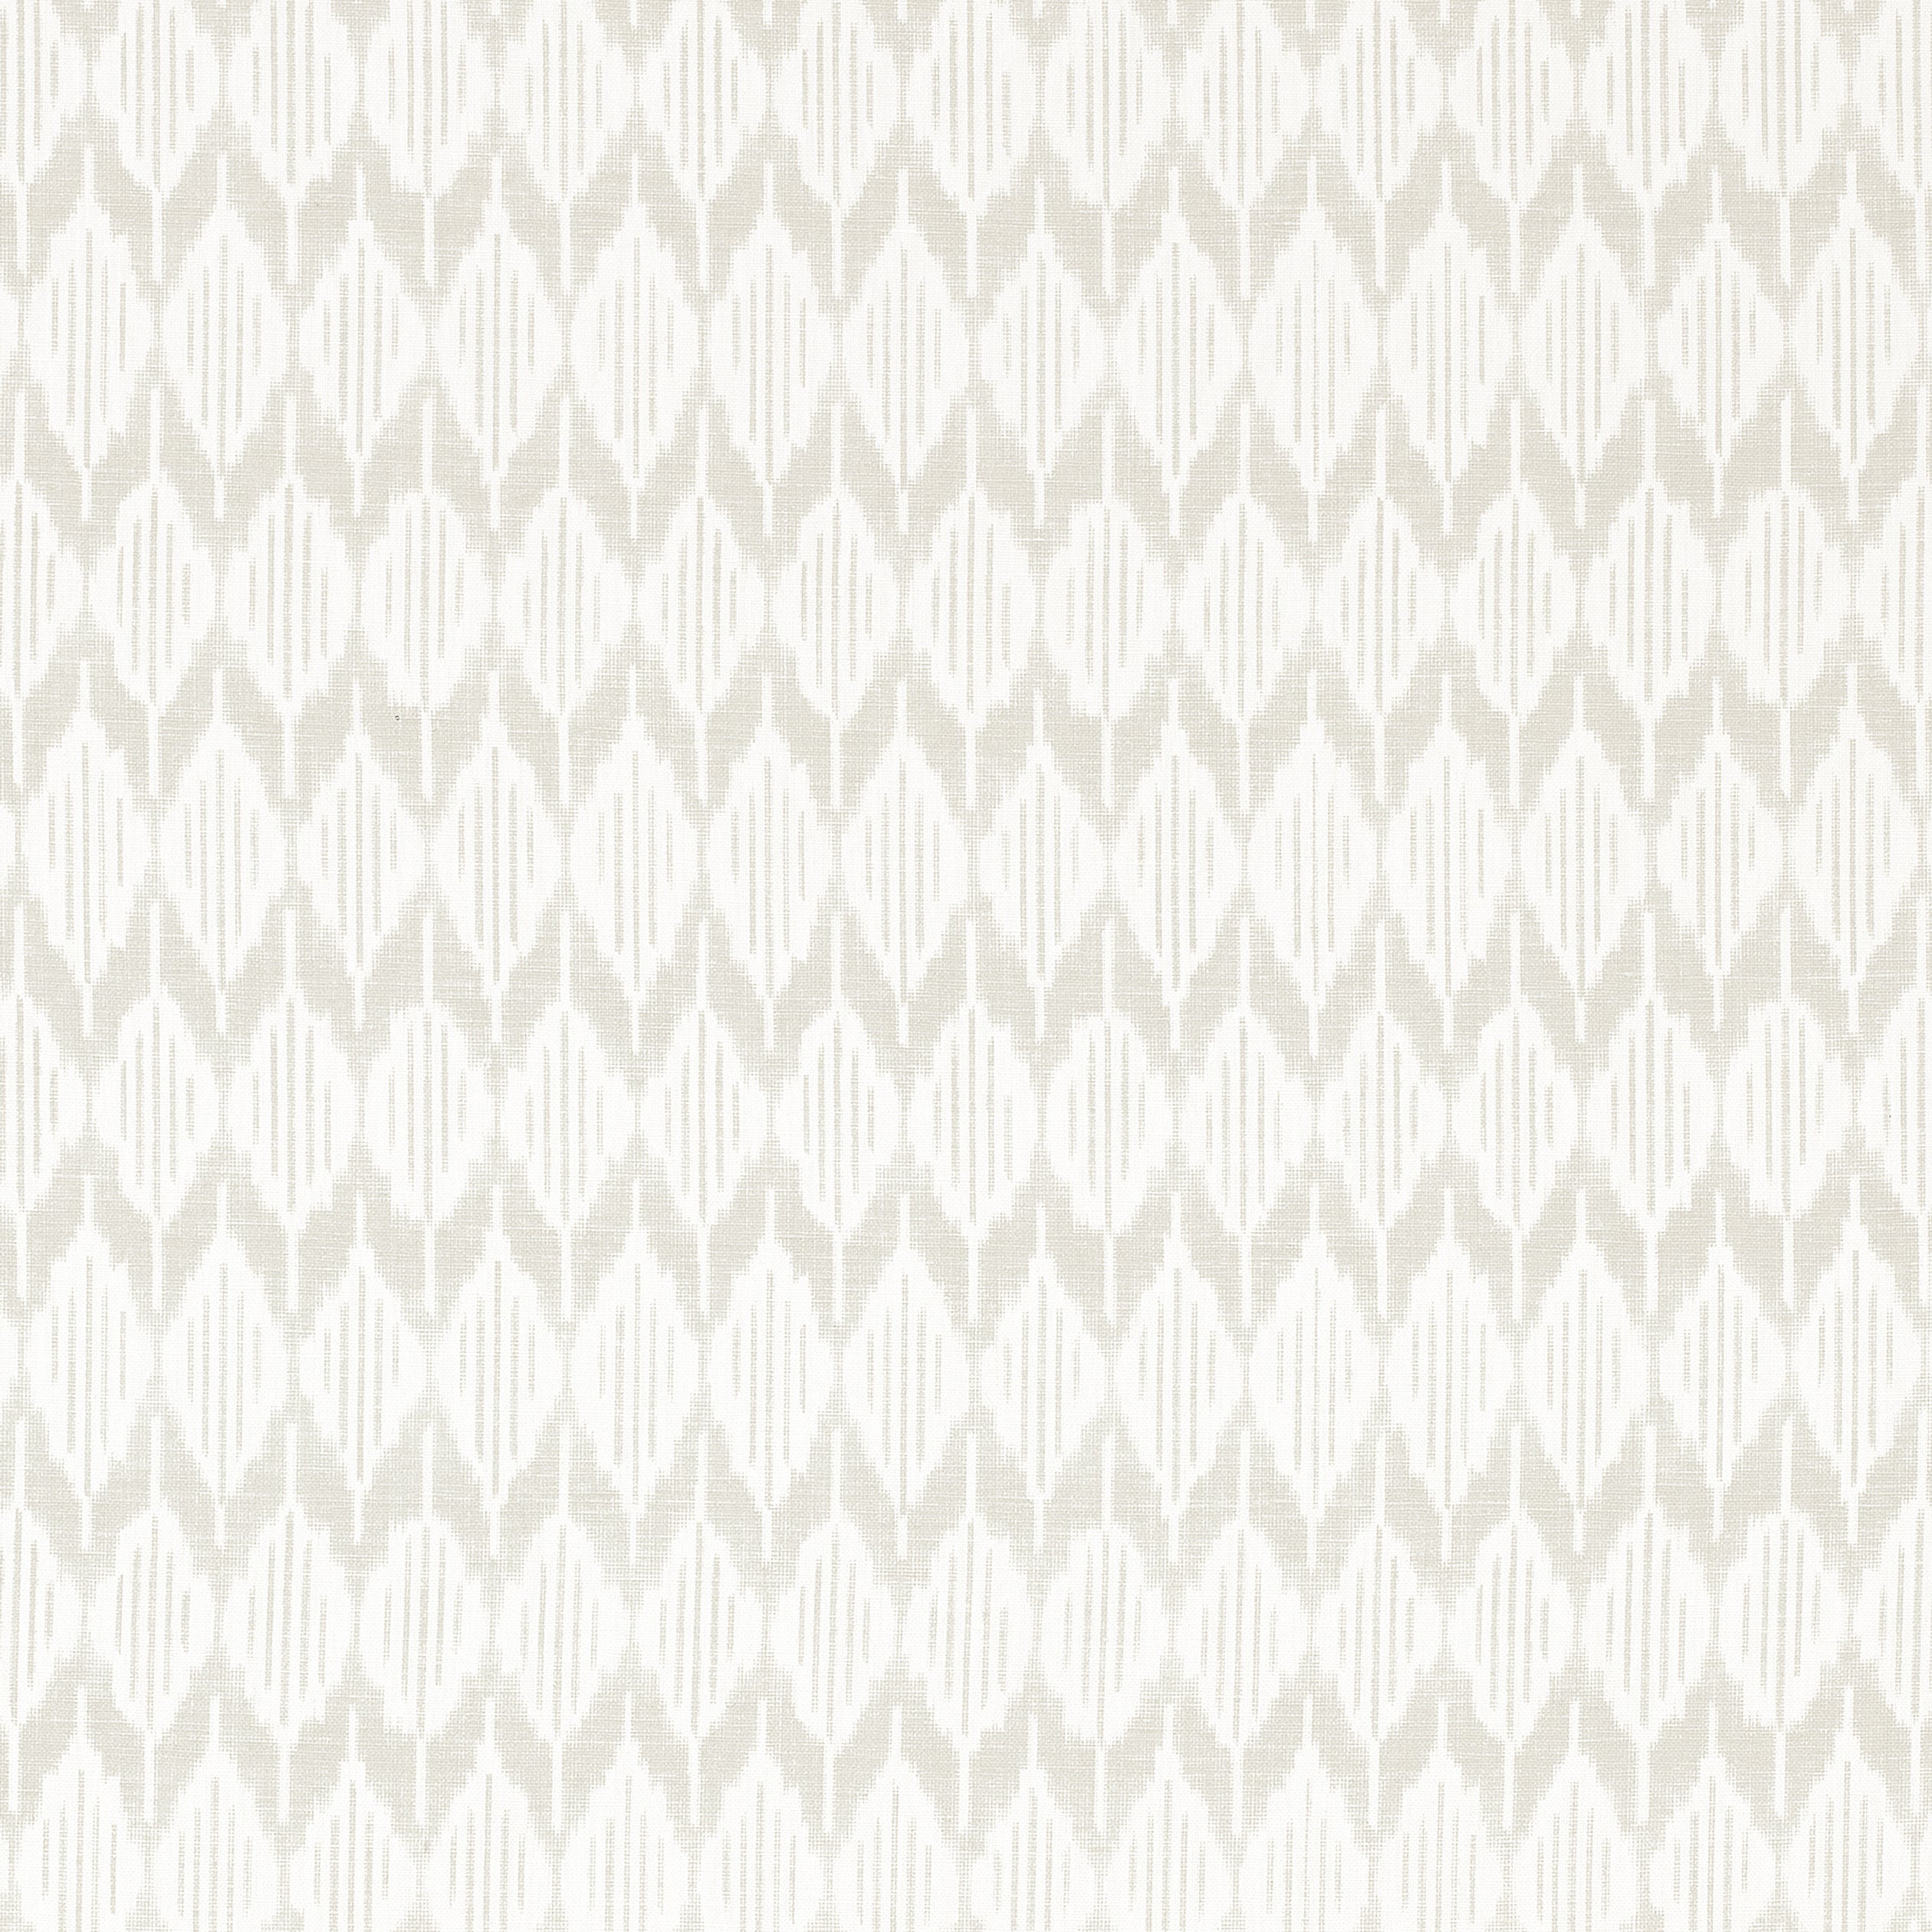 Balin Ikat fabric in beige color - pattern number AF73021 - by Anna French in the Meridian collection